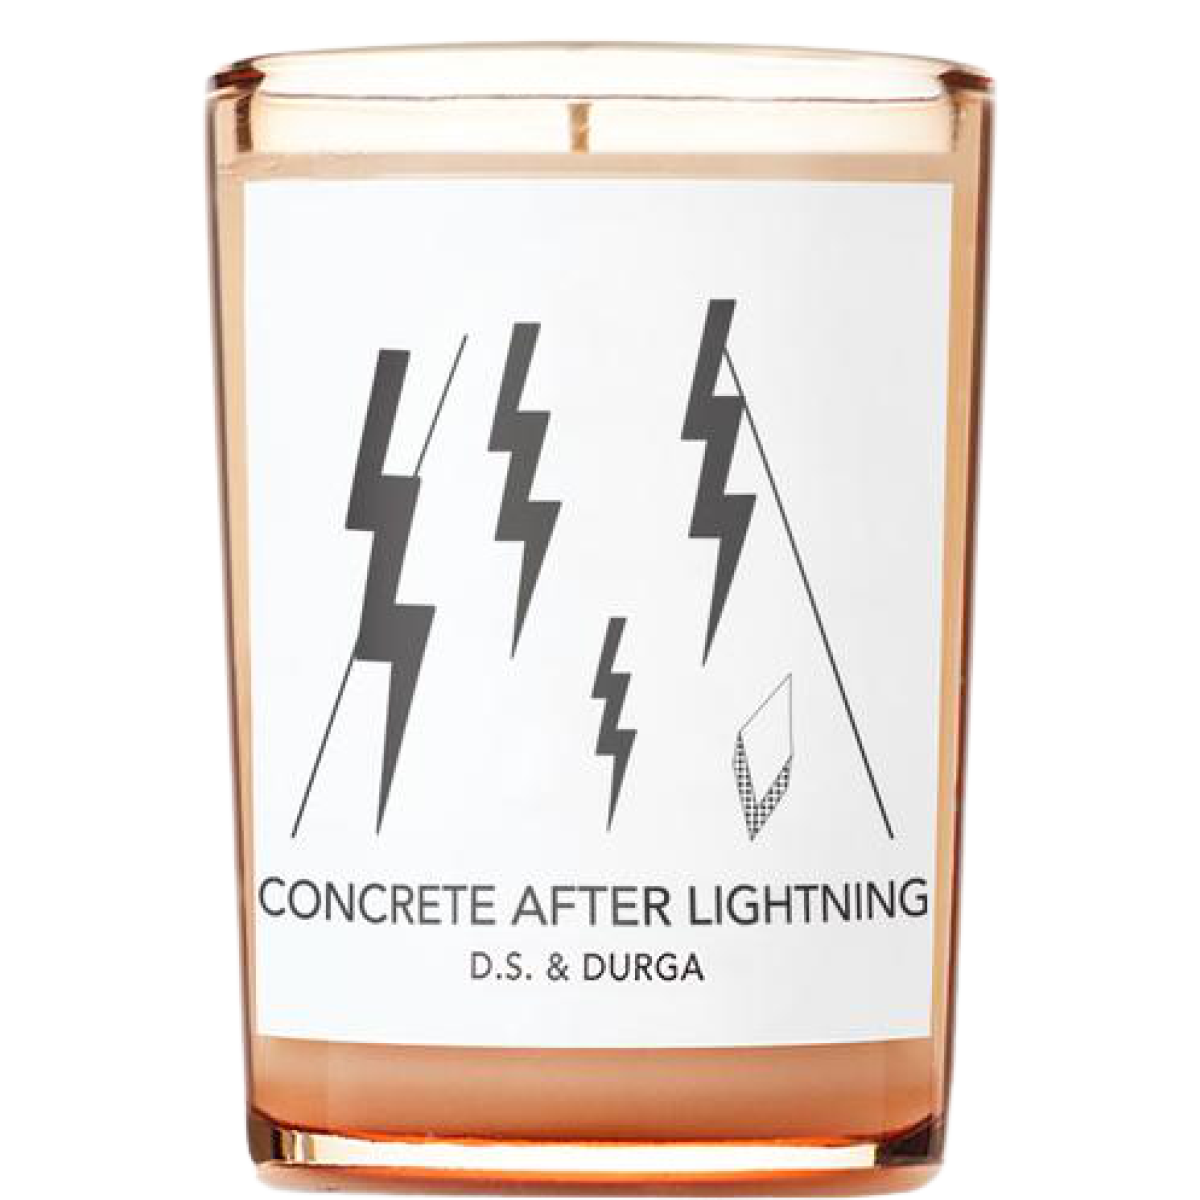 Primary Image of Concrete After Lightning Candle